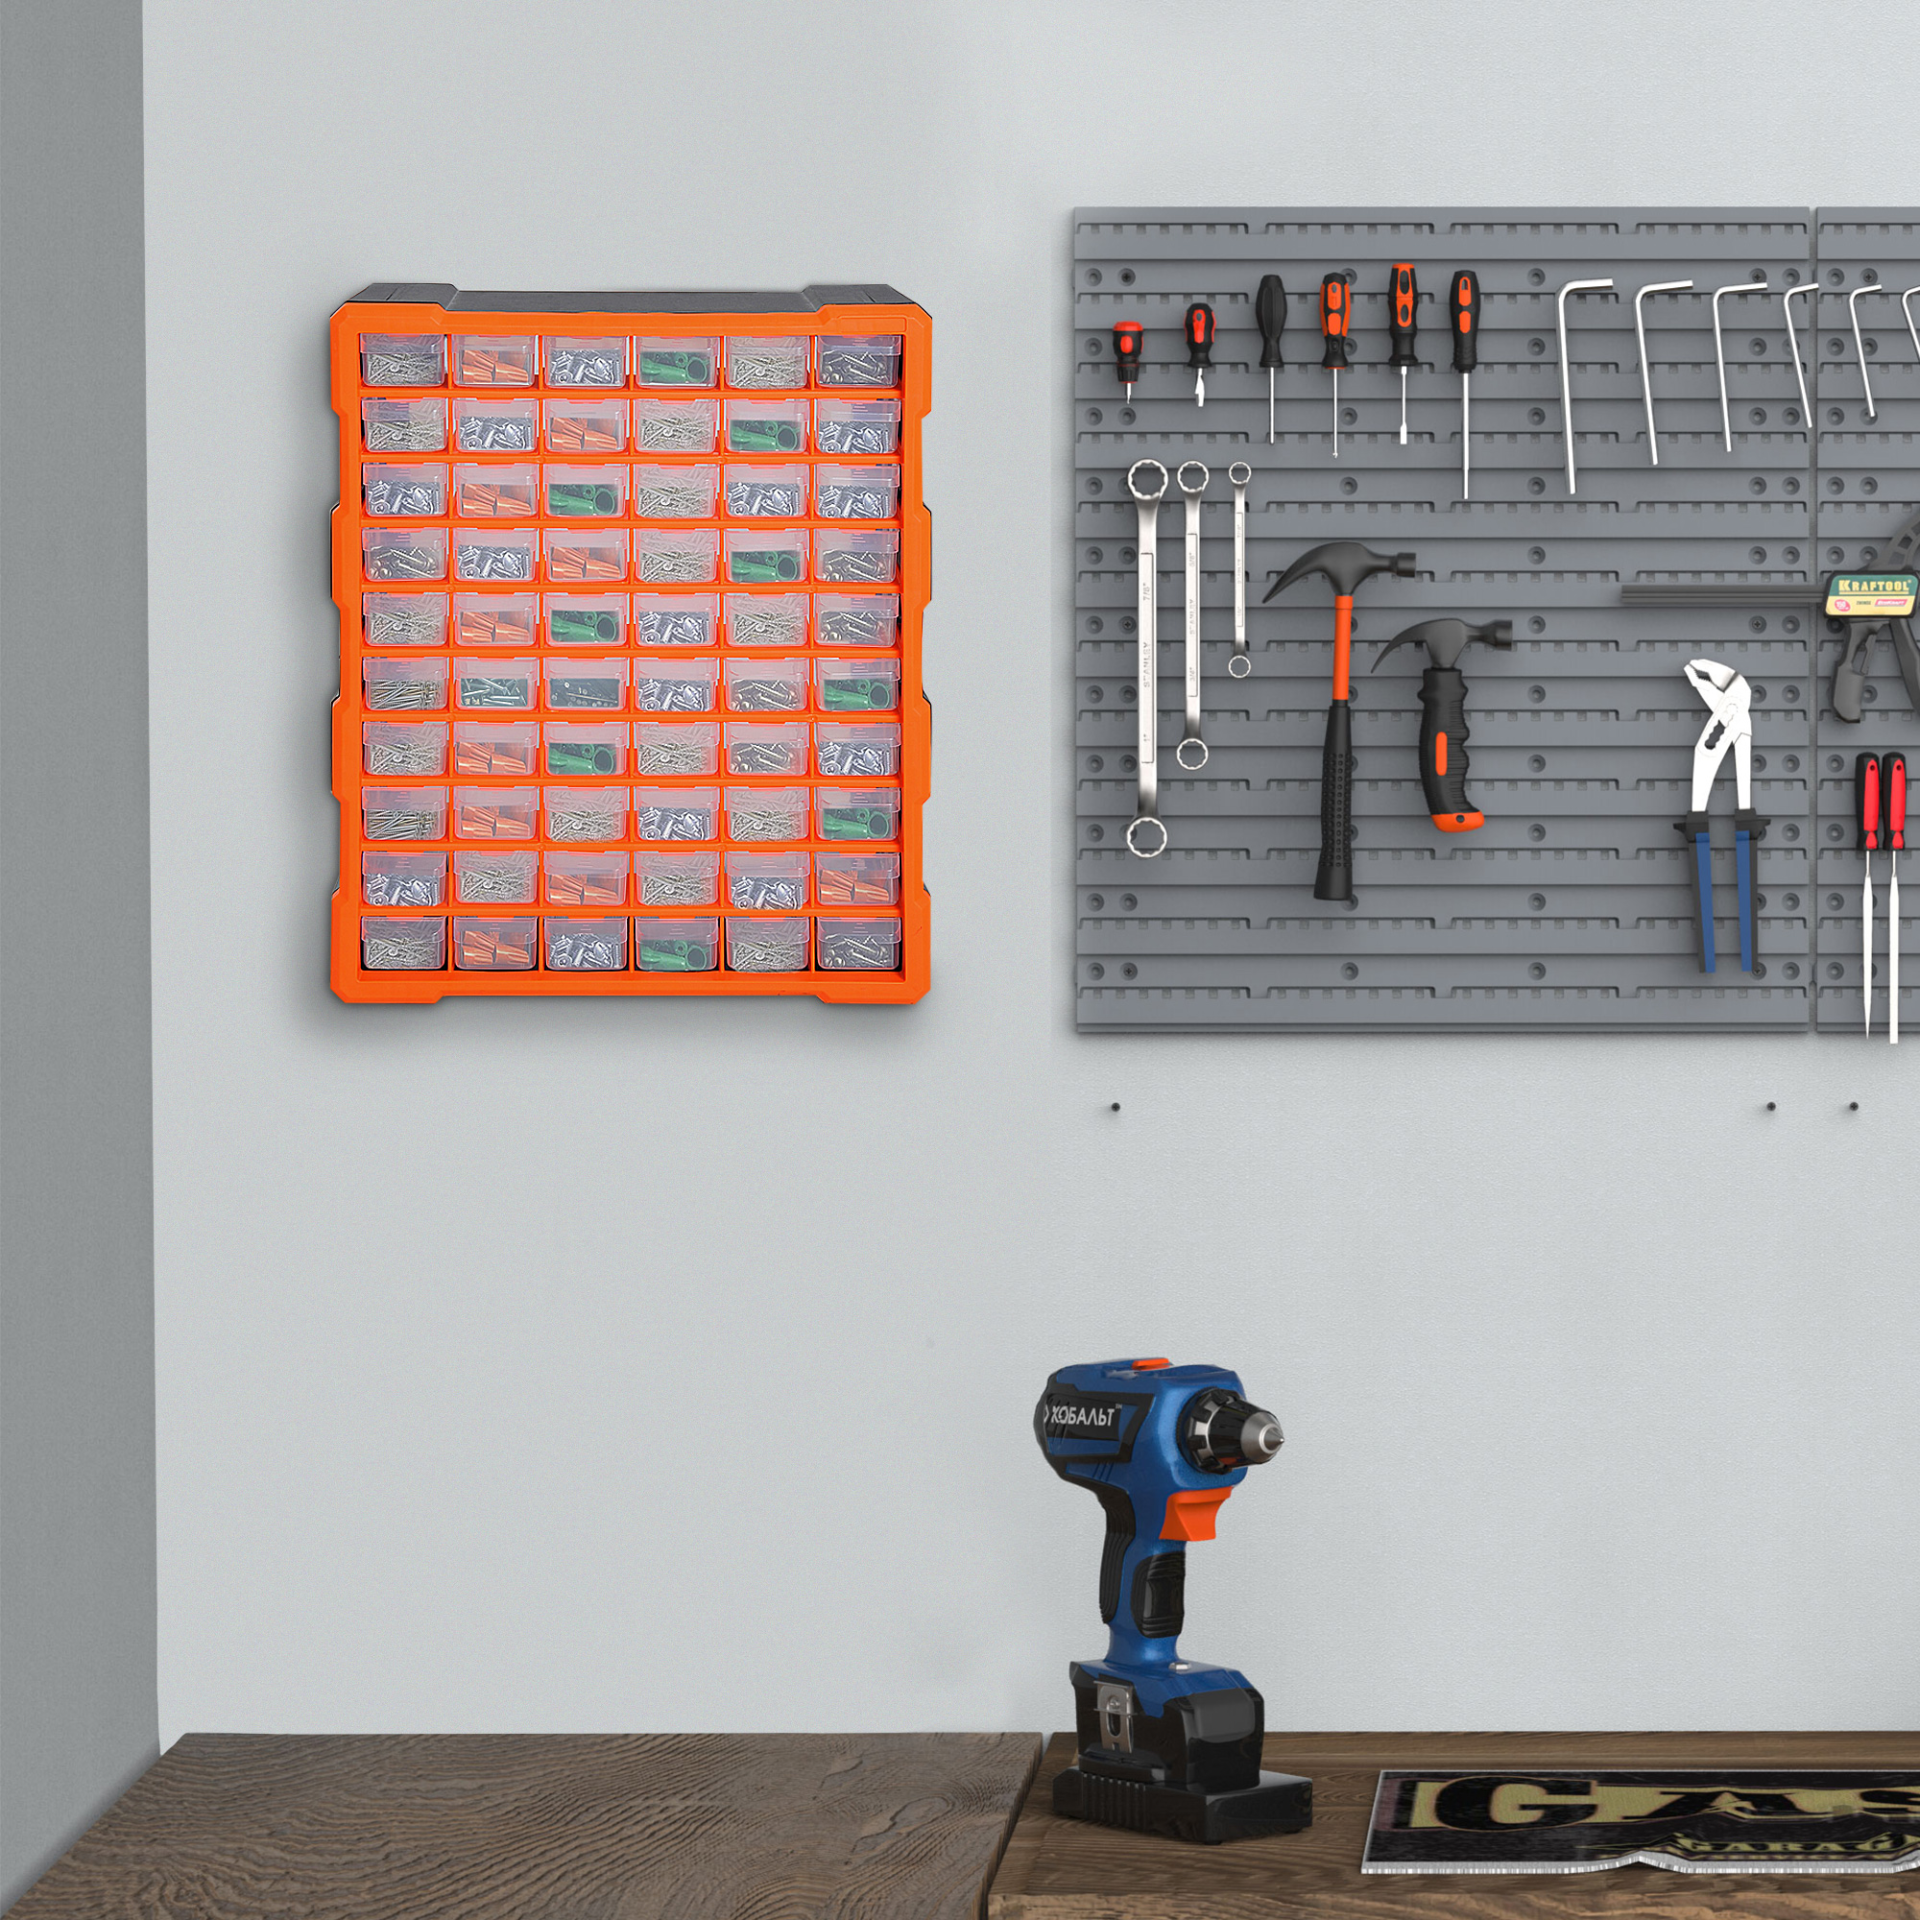 DURHAND 60 Drawers Parts Organiser Wall Mount Storage Cabinet Garage Small Nuts Bolts Tools Clear Orange